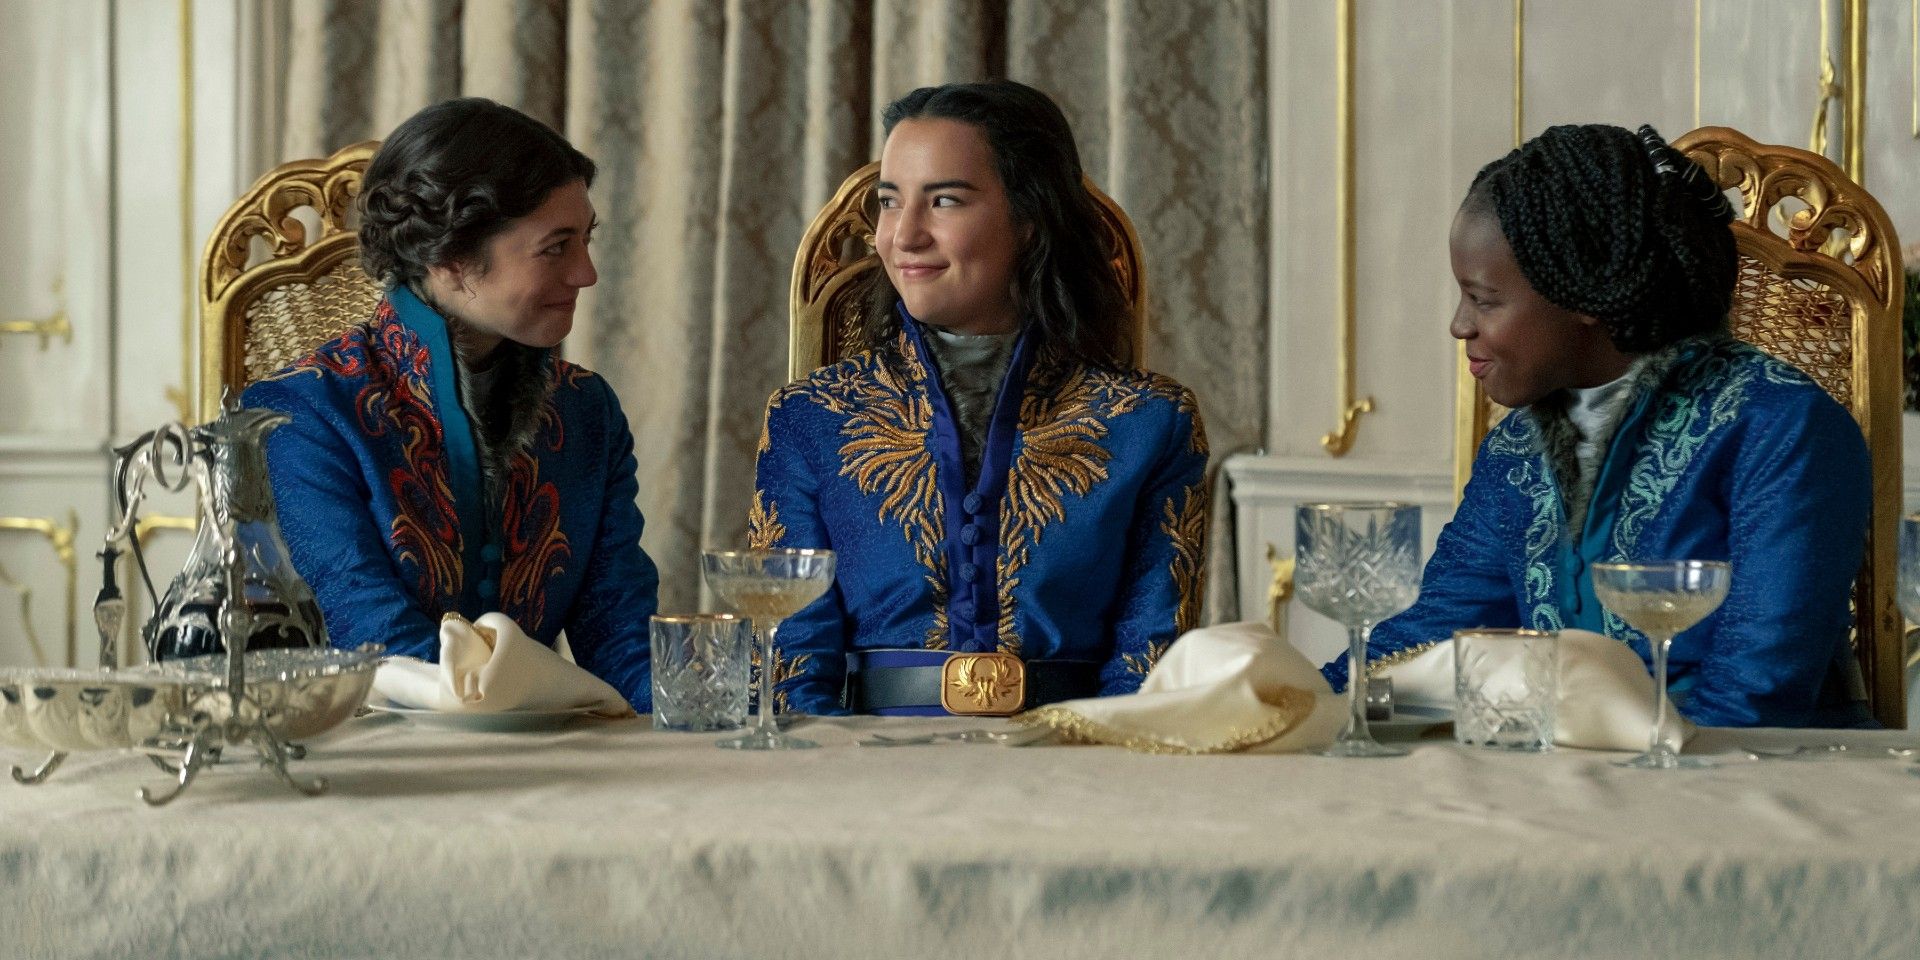 Marie, Alina, and Nadia sitting together in their blue kefta in Shadow and Bone